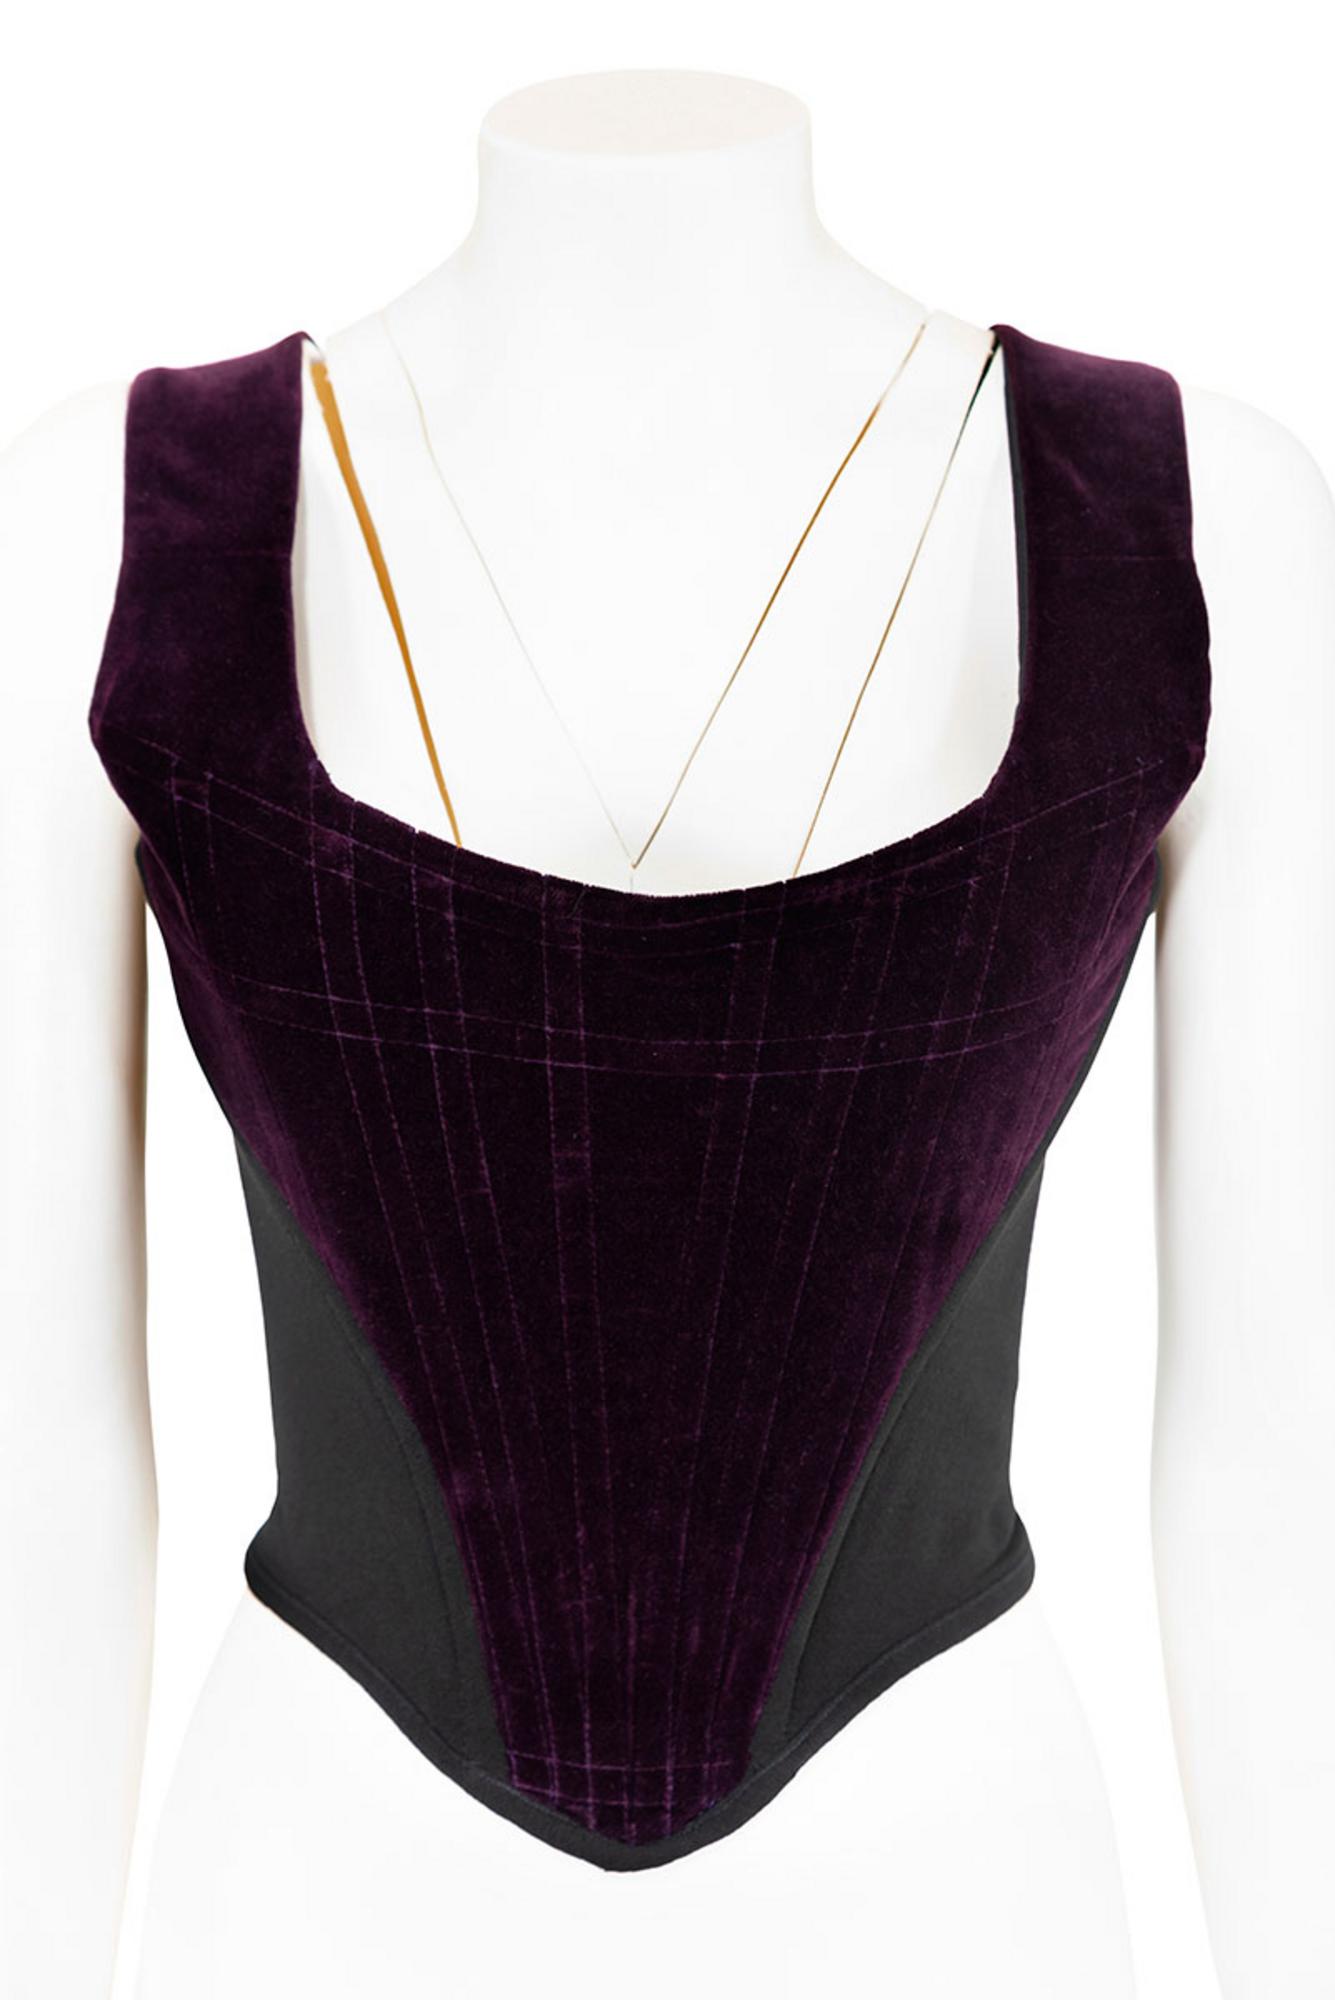 VIVIENNE WESTWOOD Iconic and rare velvet bustier DESCRIPTION: Iconic and rare...